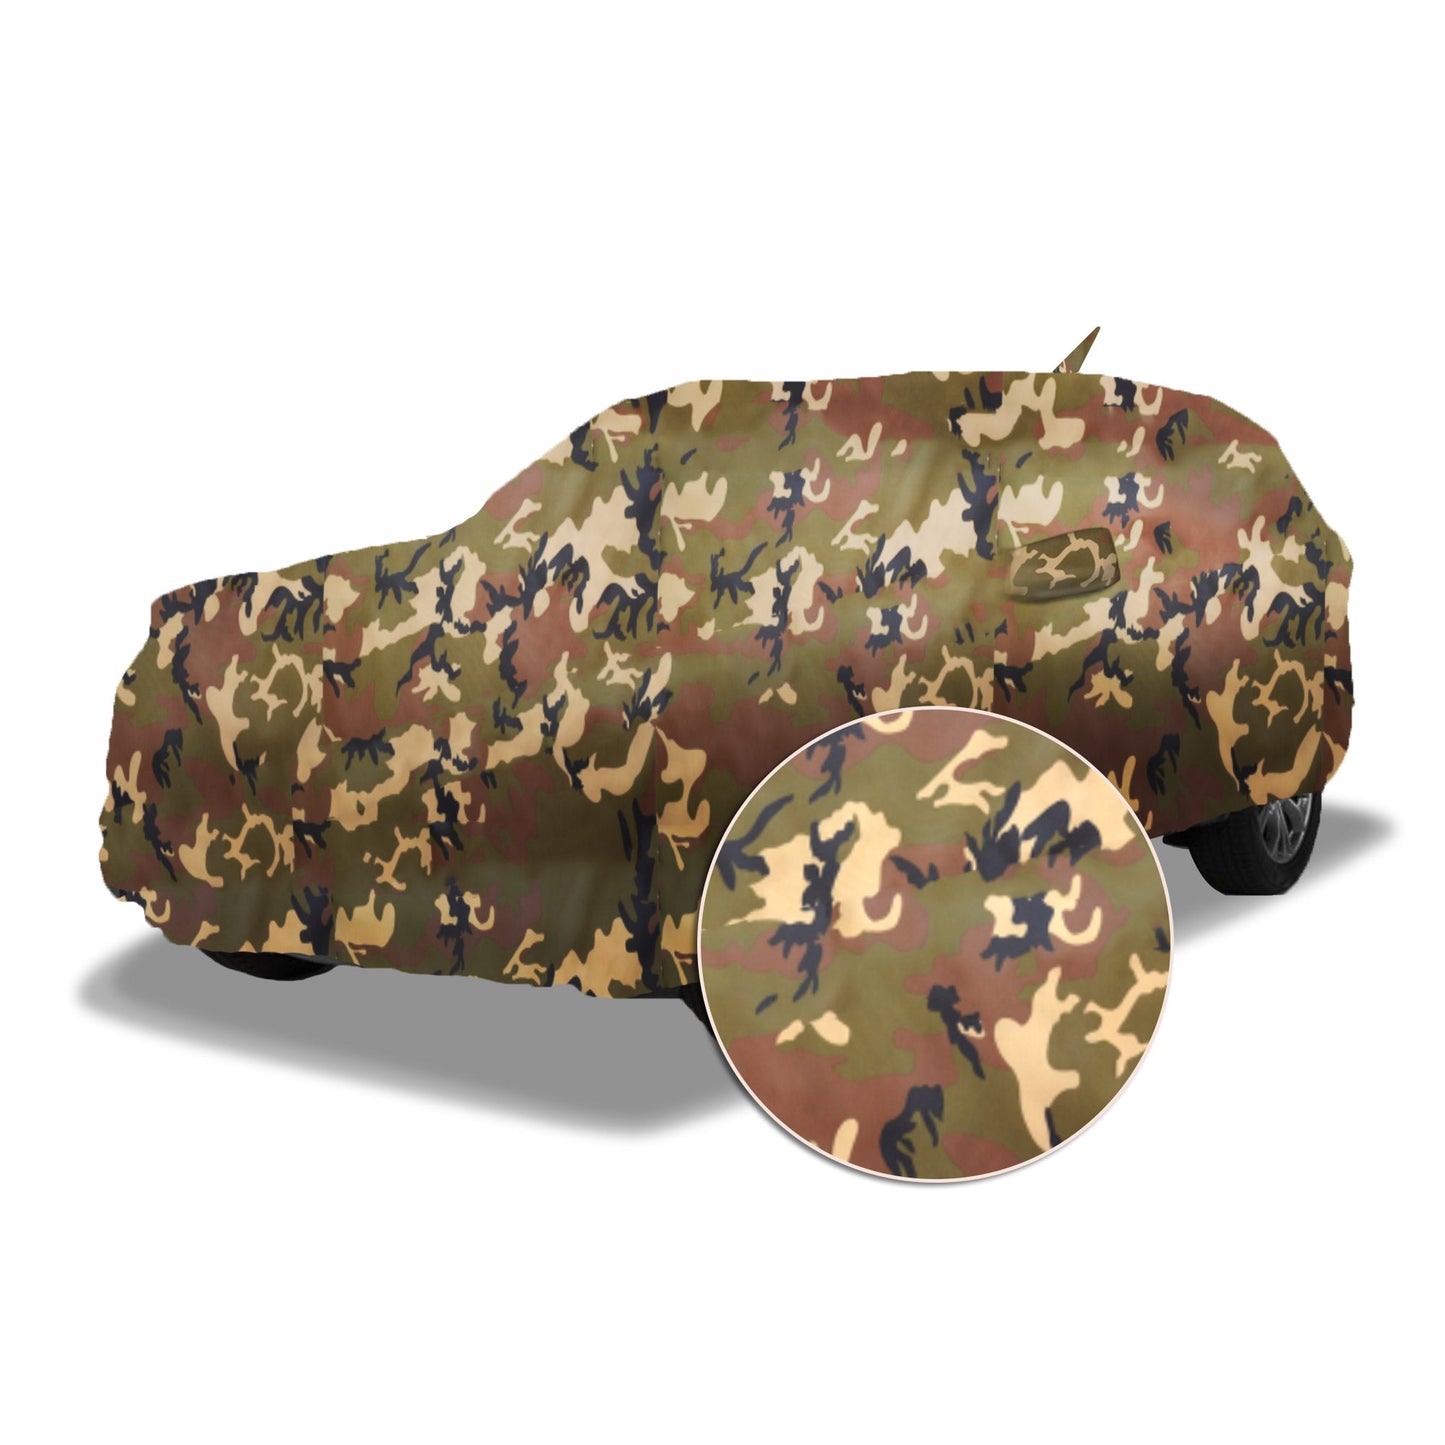 Ascot Maruti Suzuki Wagonr 2010-2019 Model Car Body Cover Extra Strong & Dust Proof Jungle Military Car Cover with UV Proof & Water-Resistant Coating